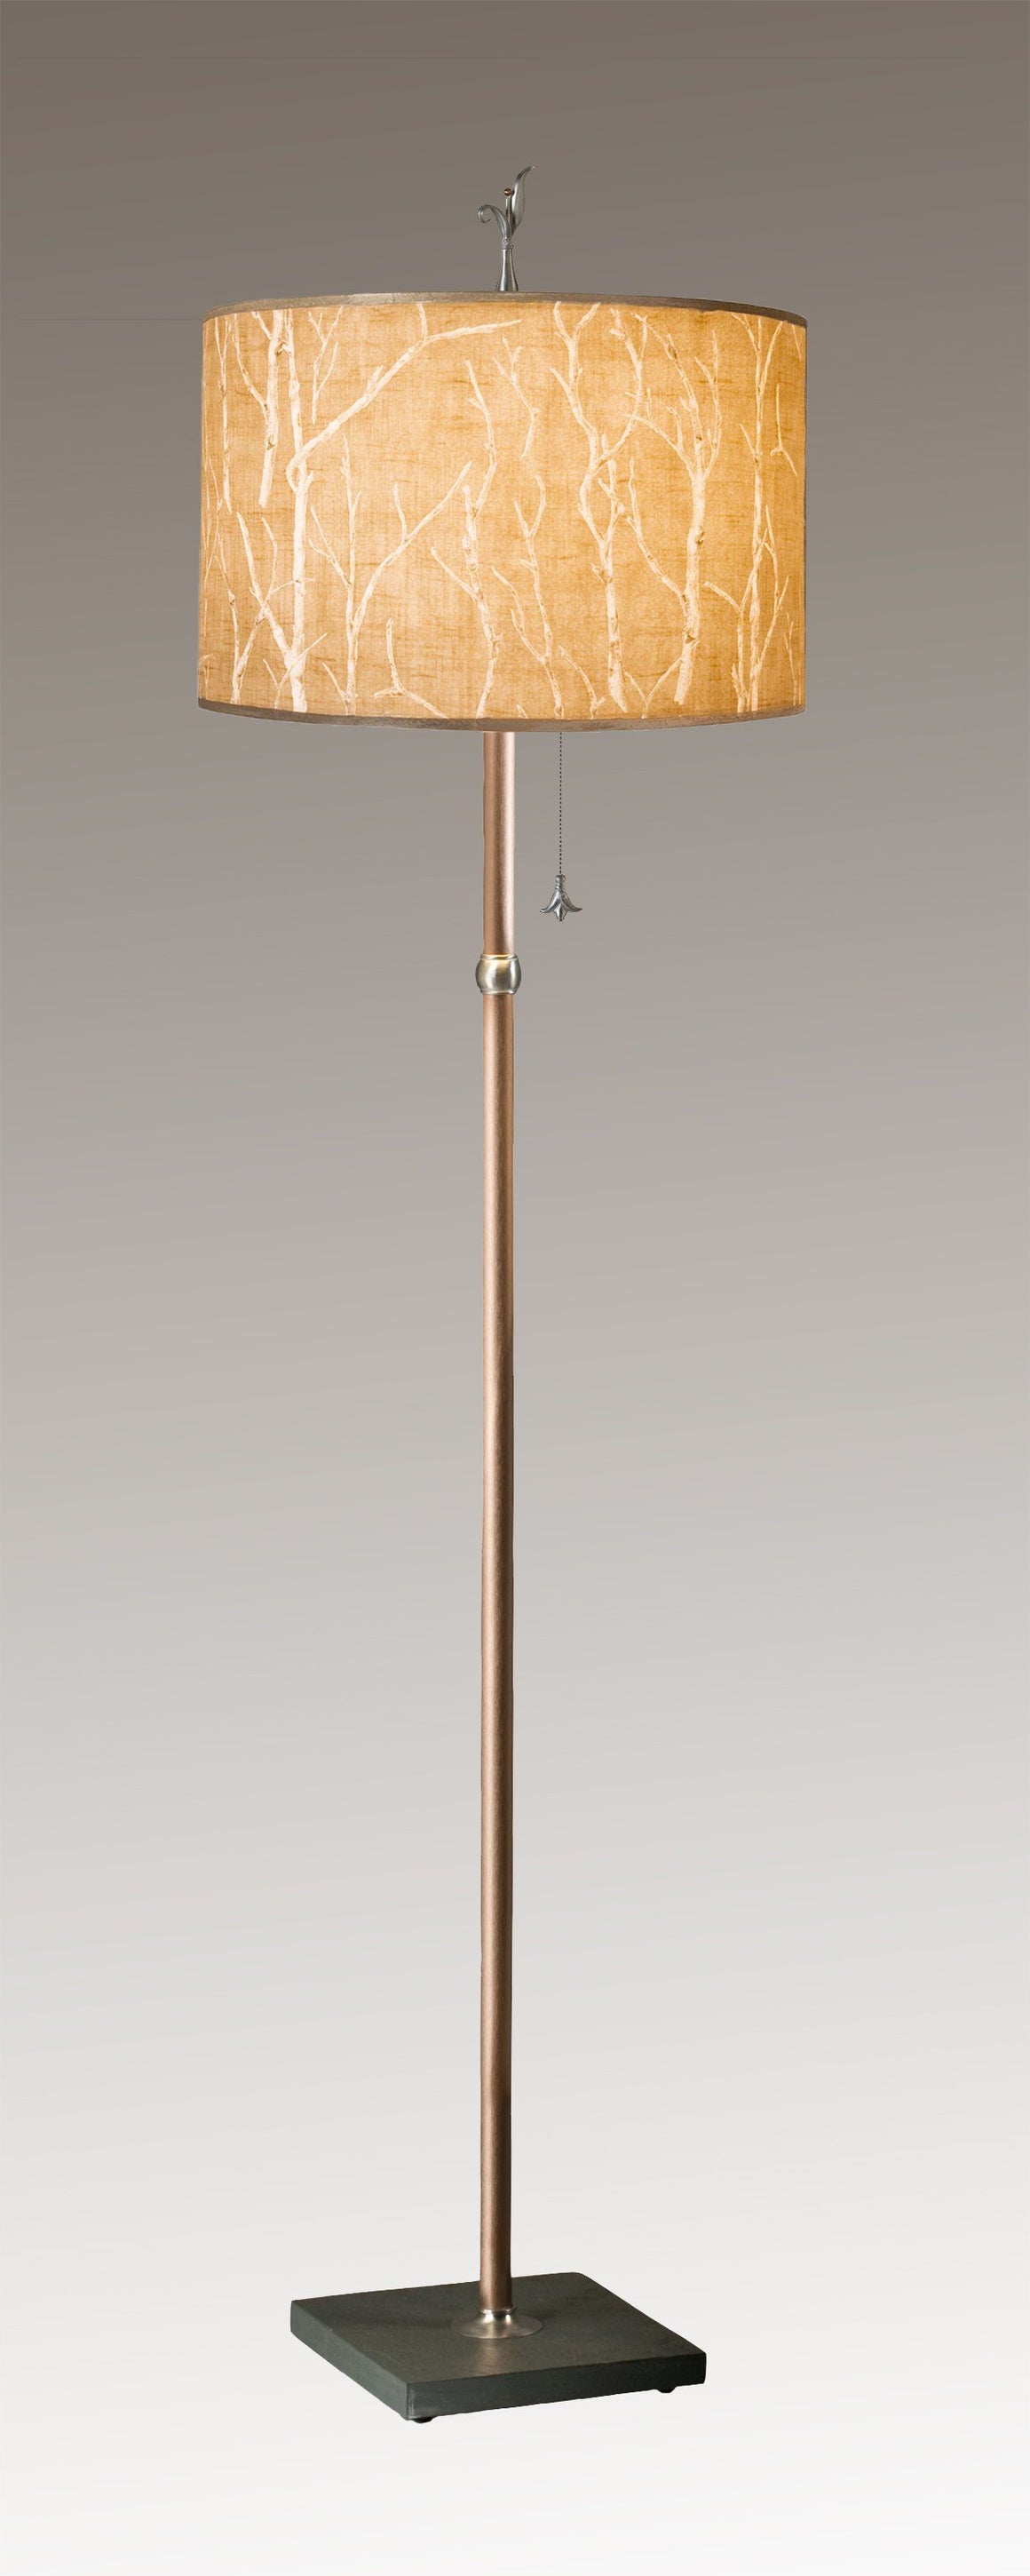 Copper Floor Lamp with Large Drum Shade in Twigs